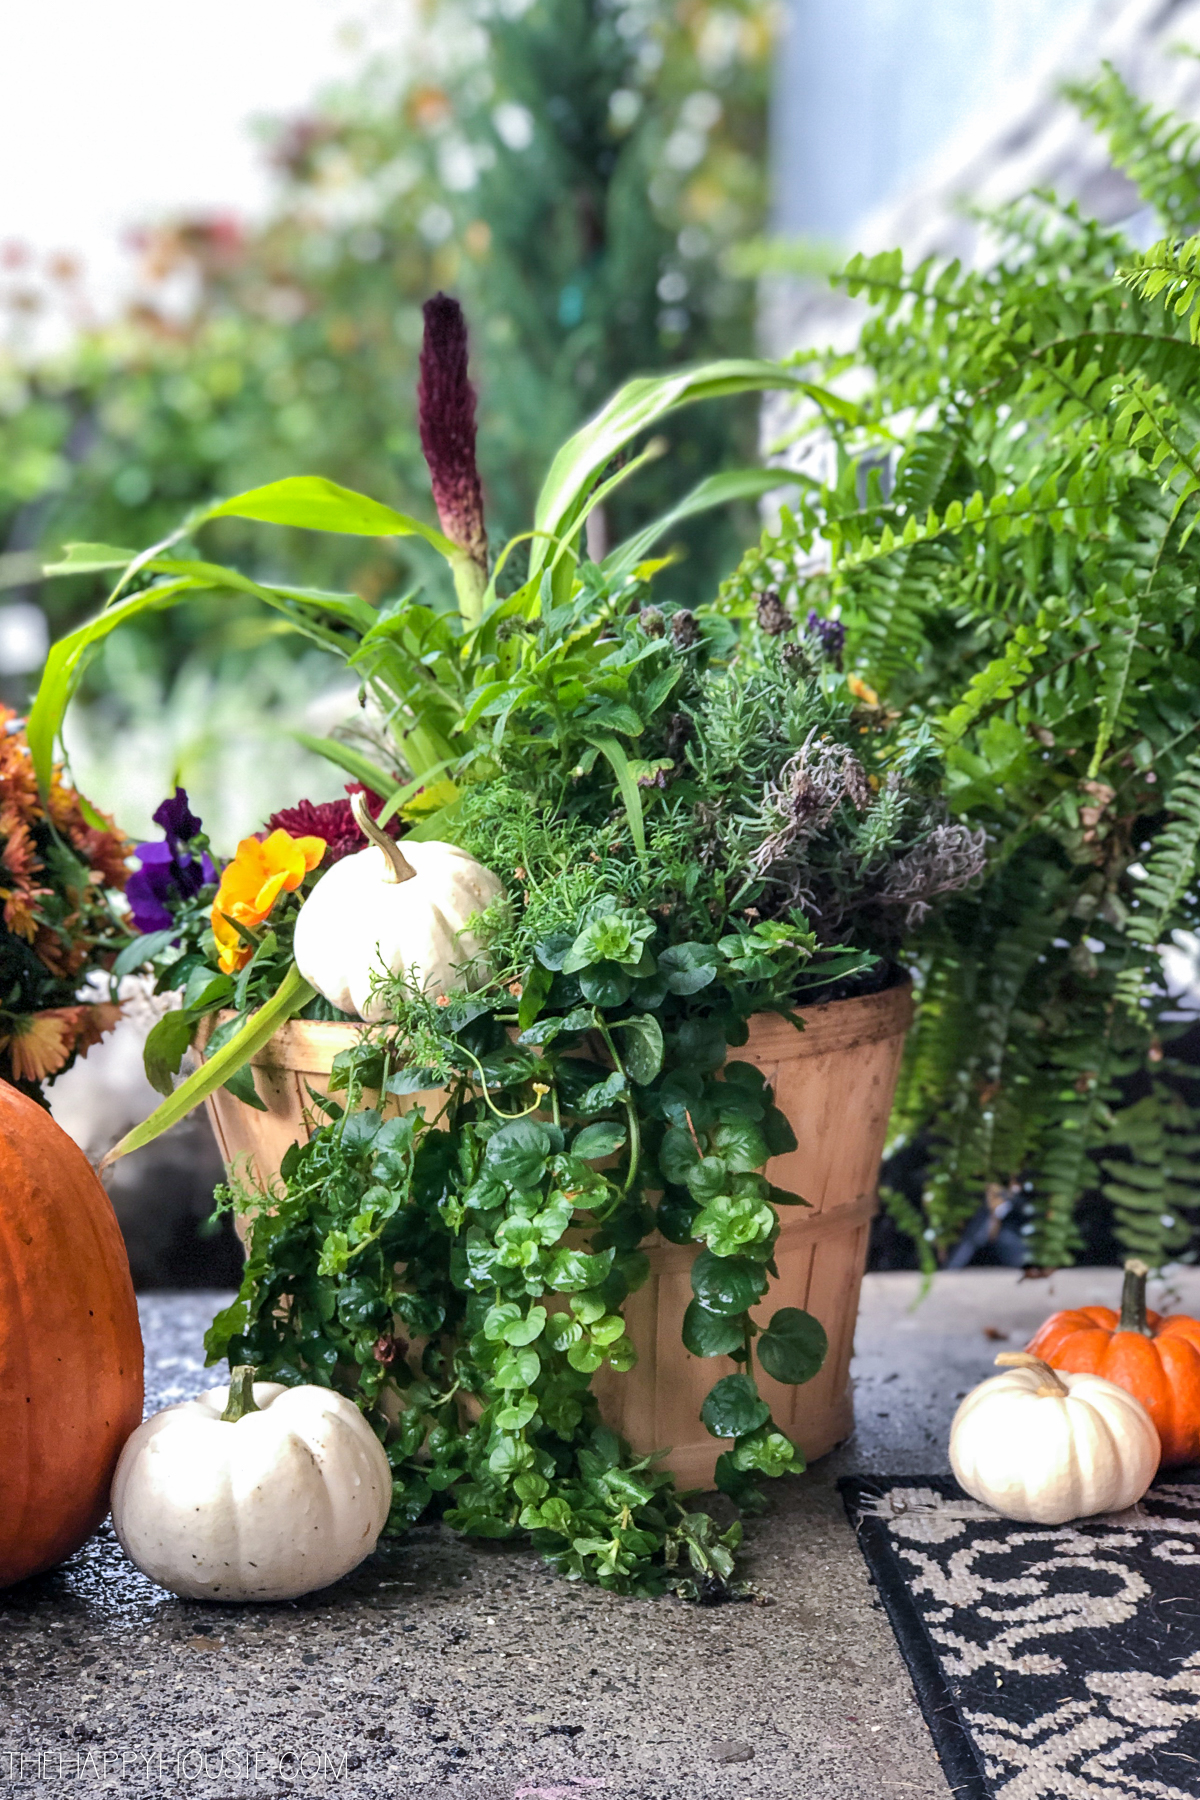 A planter filled with greenery and pumpkins on the front porch.